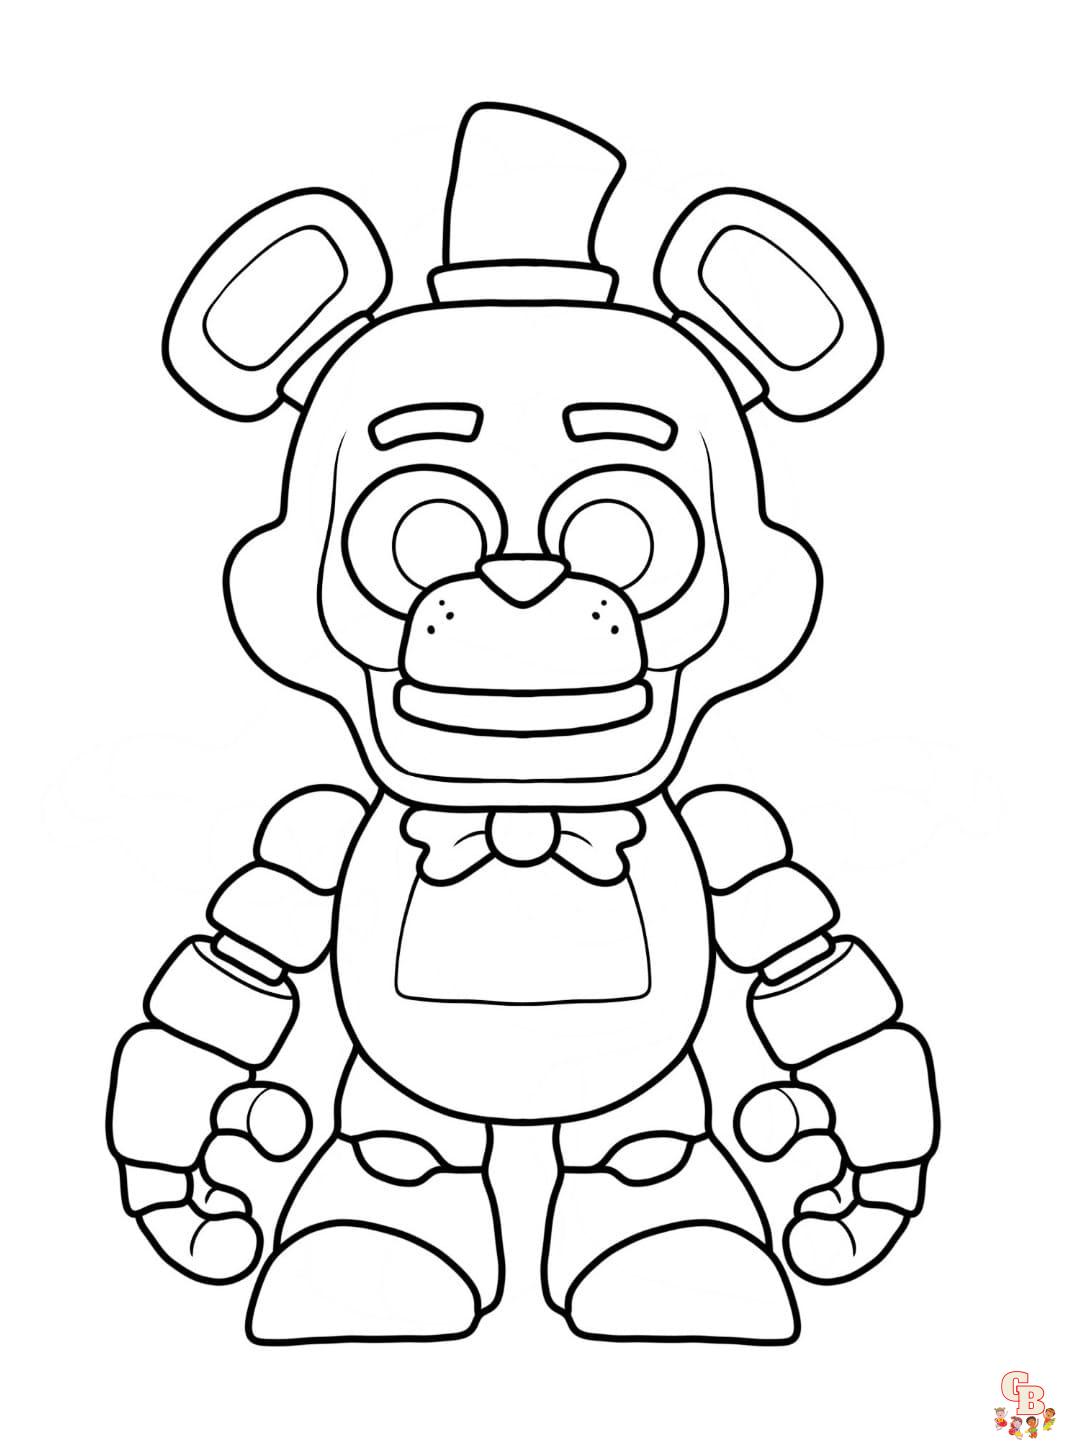 Printable freddy coloring pages free for kids and adults